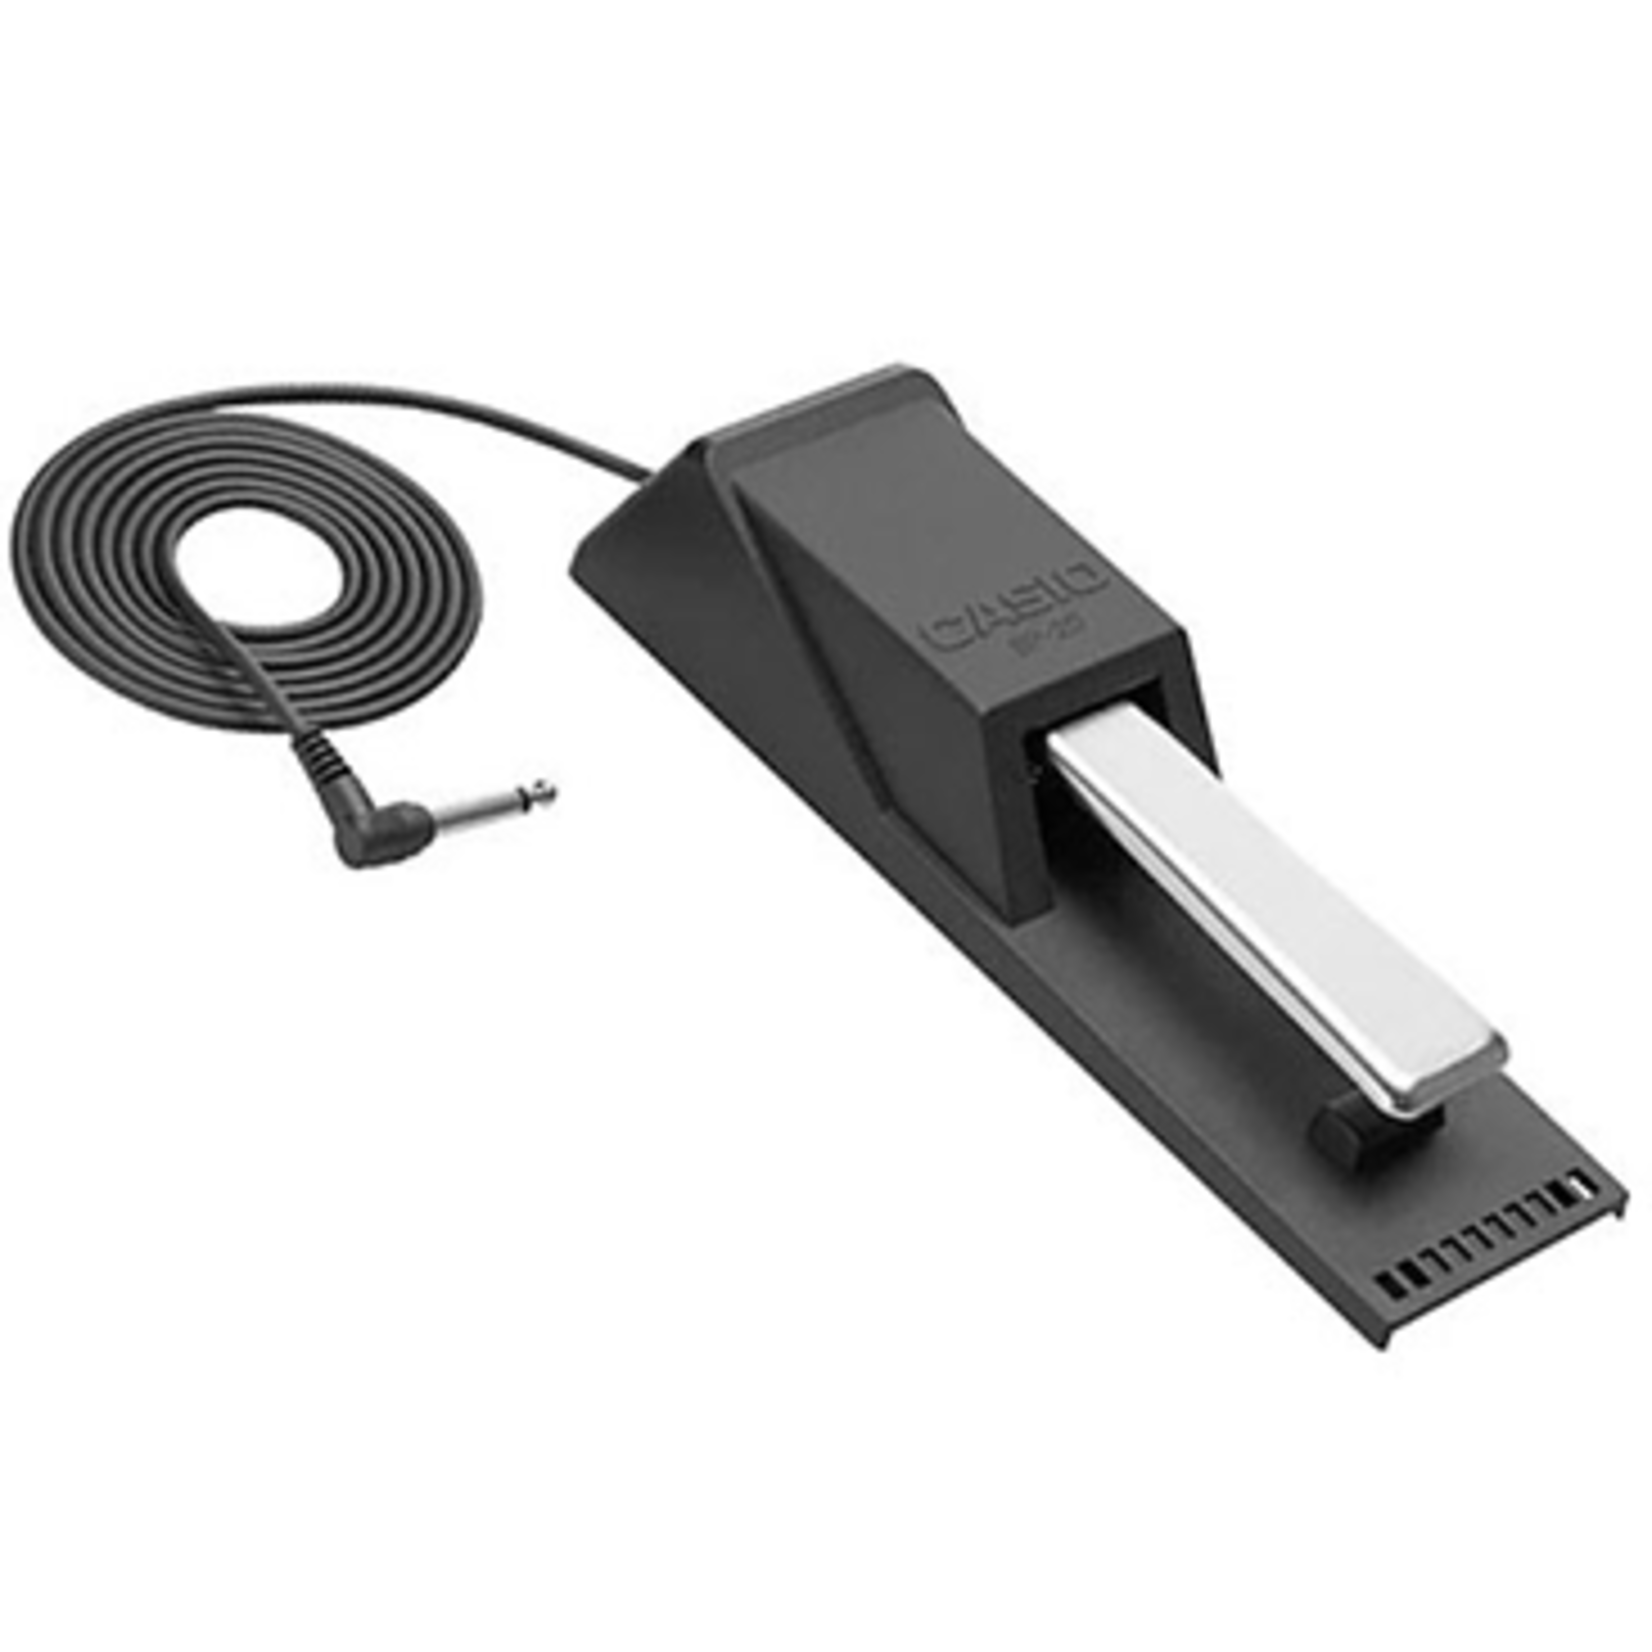 Casio SP-20 Piano-Style Sustain Pedal